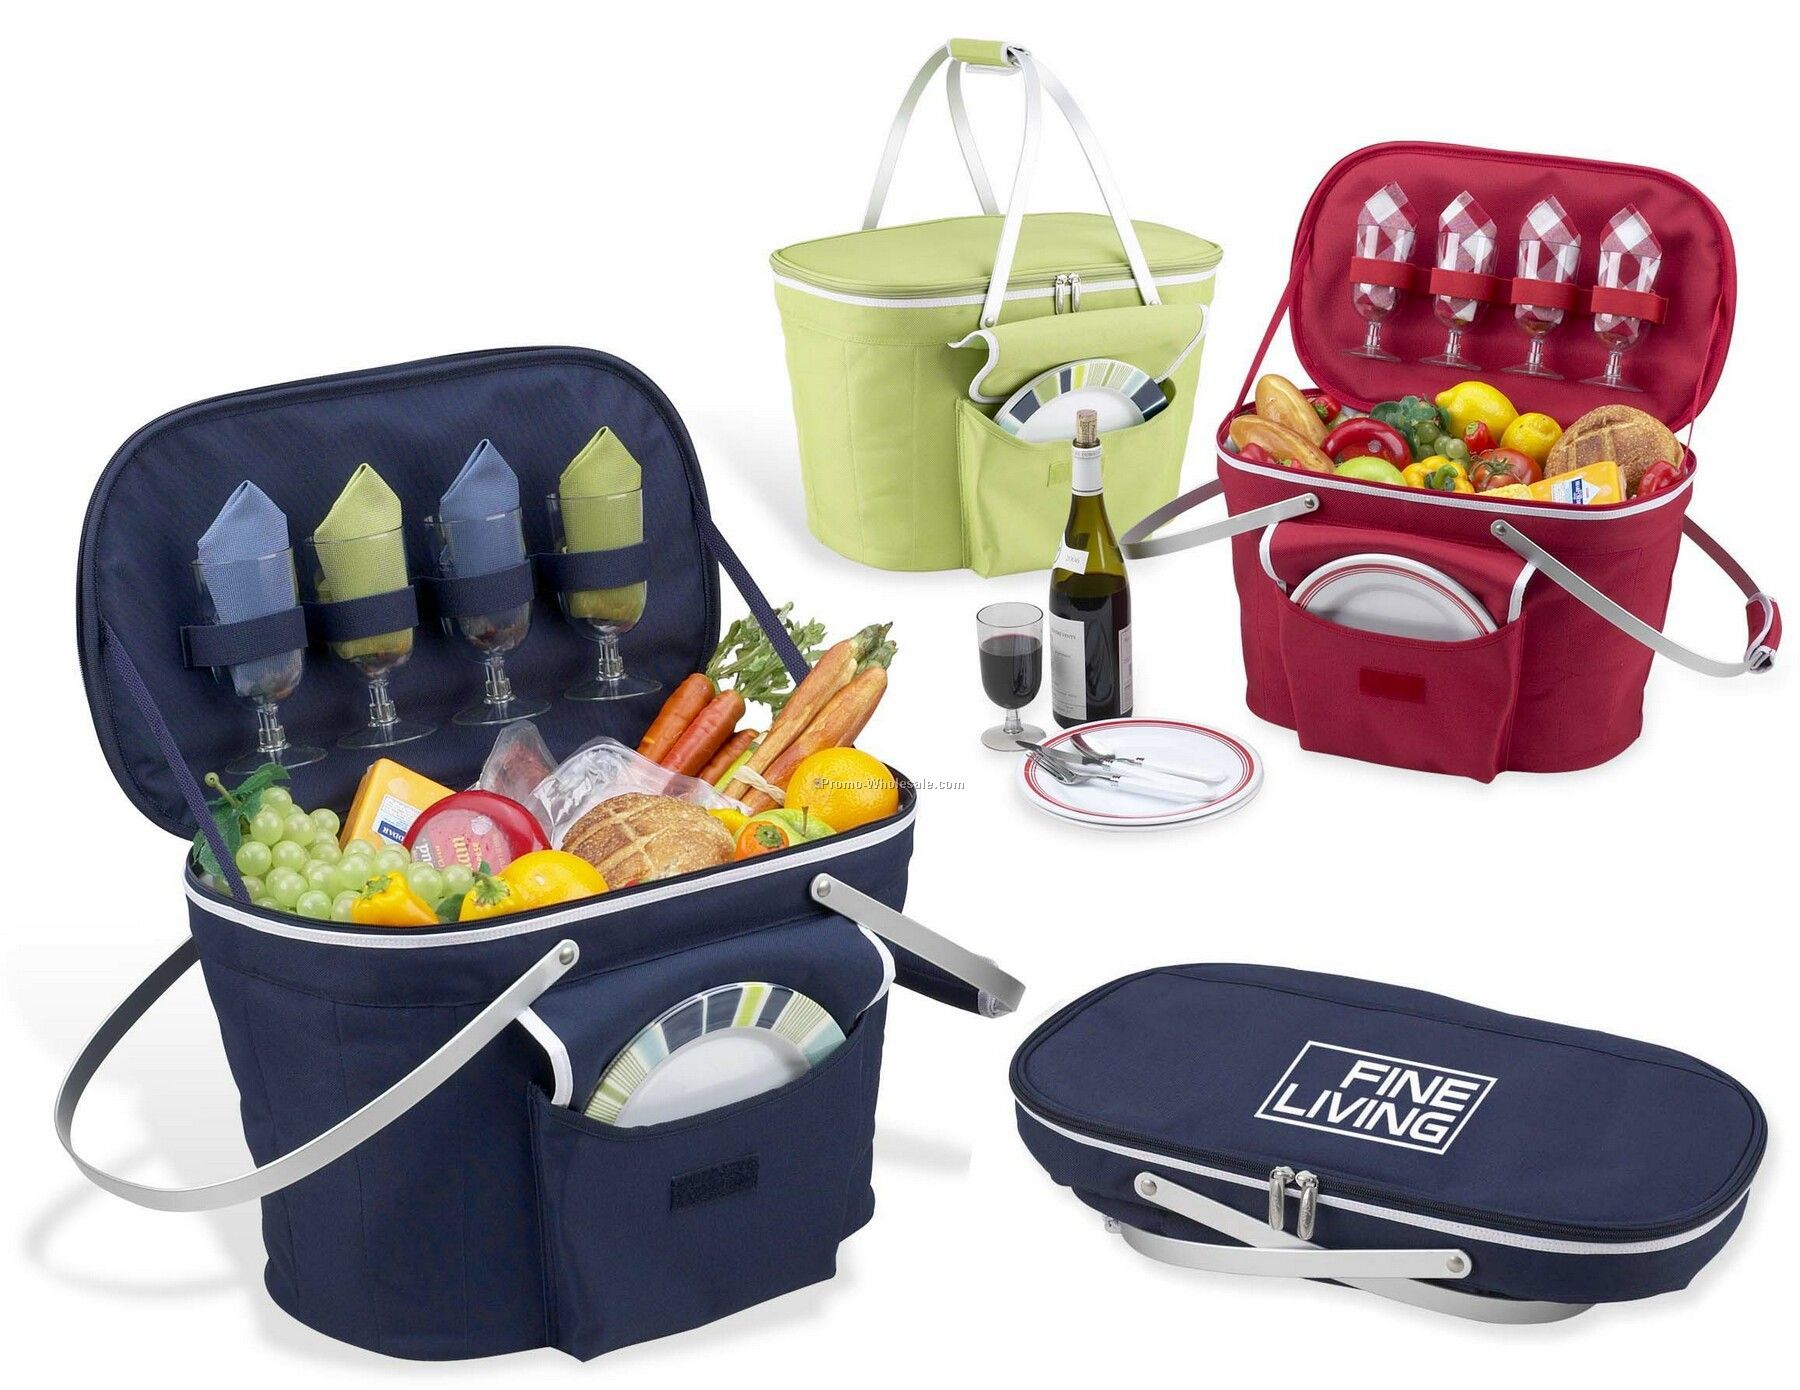 11.5"x18.5"x11.5" Collapsible Insulated Picnic Basket